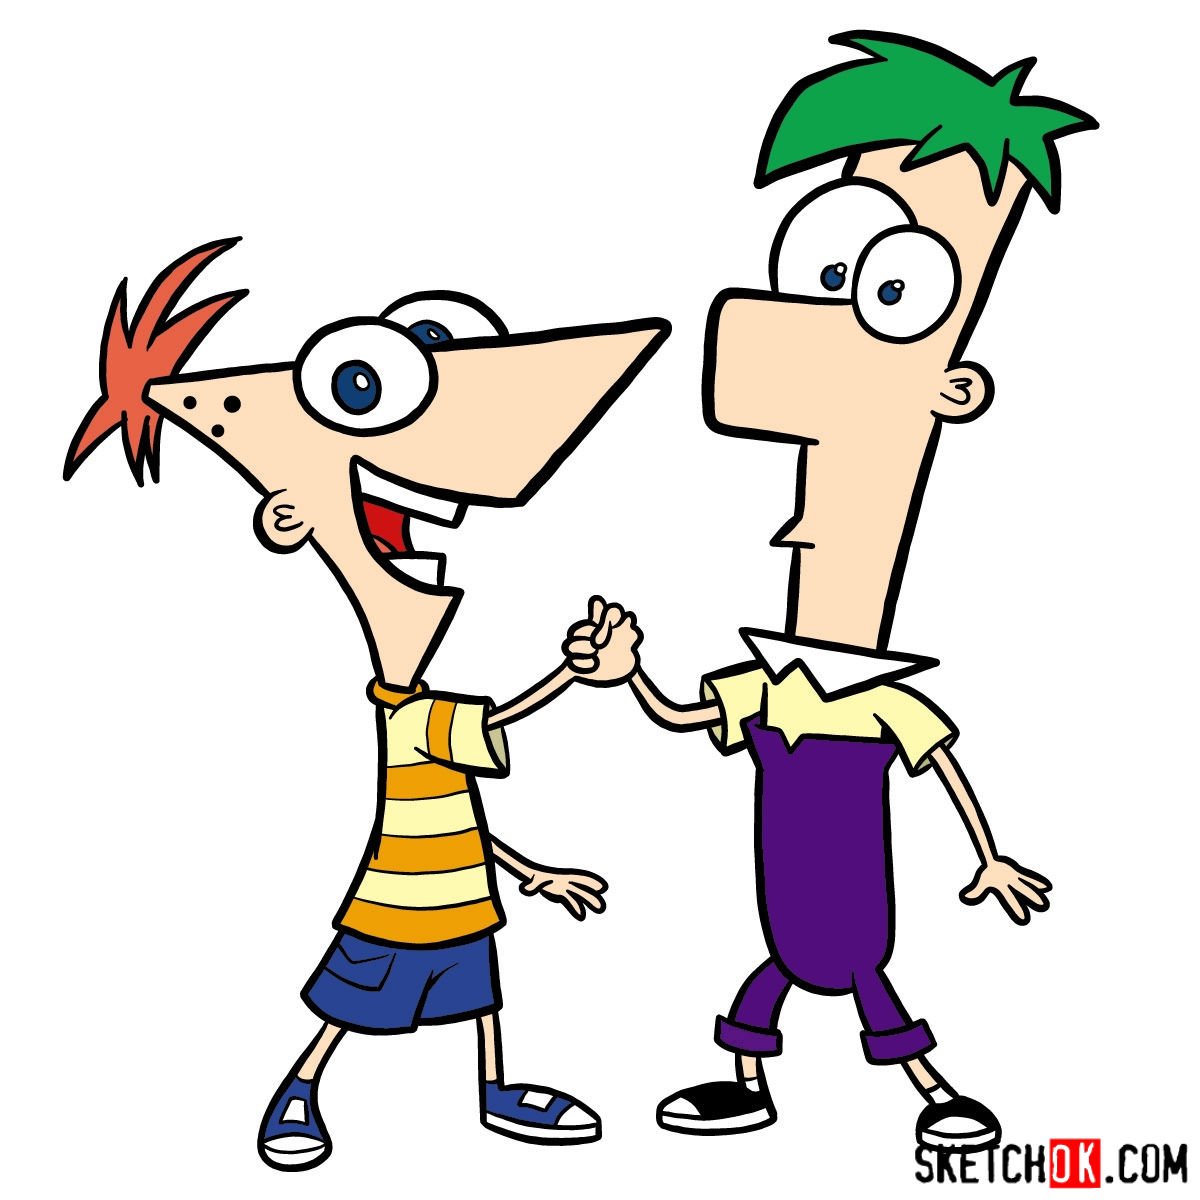 Phineas and ferb drawings